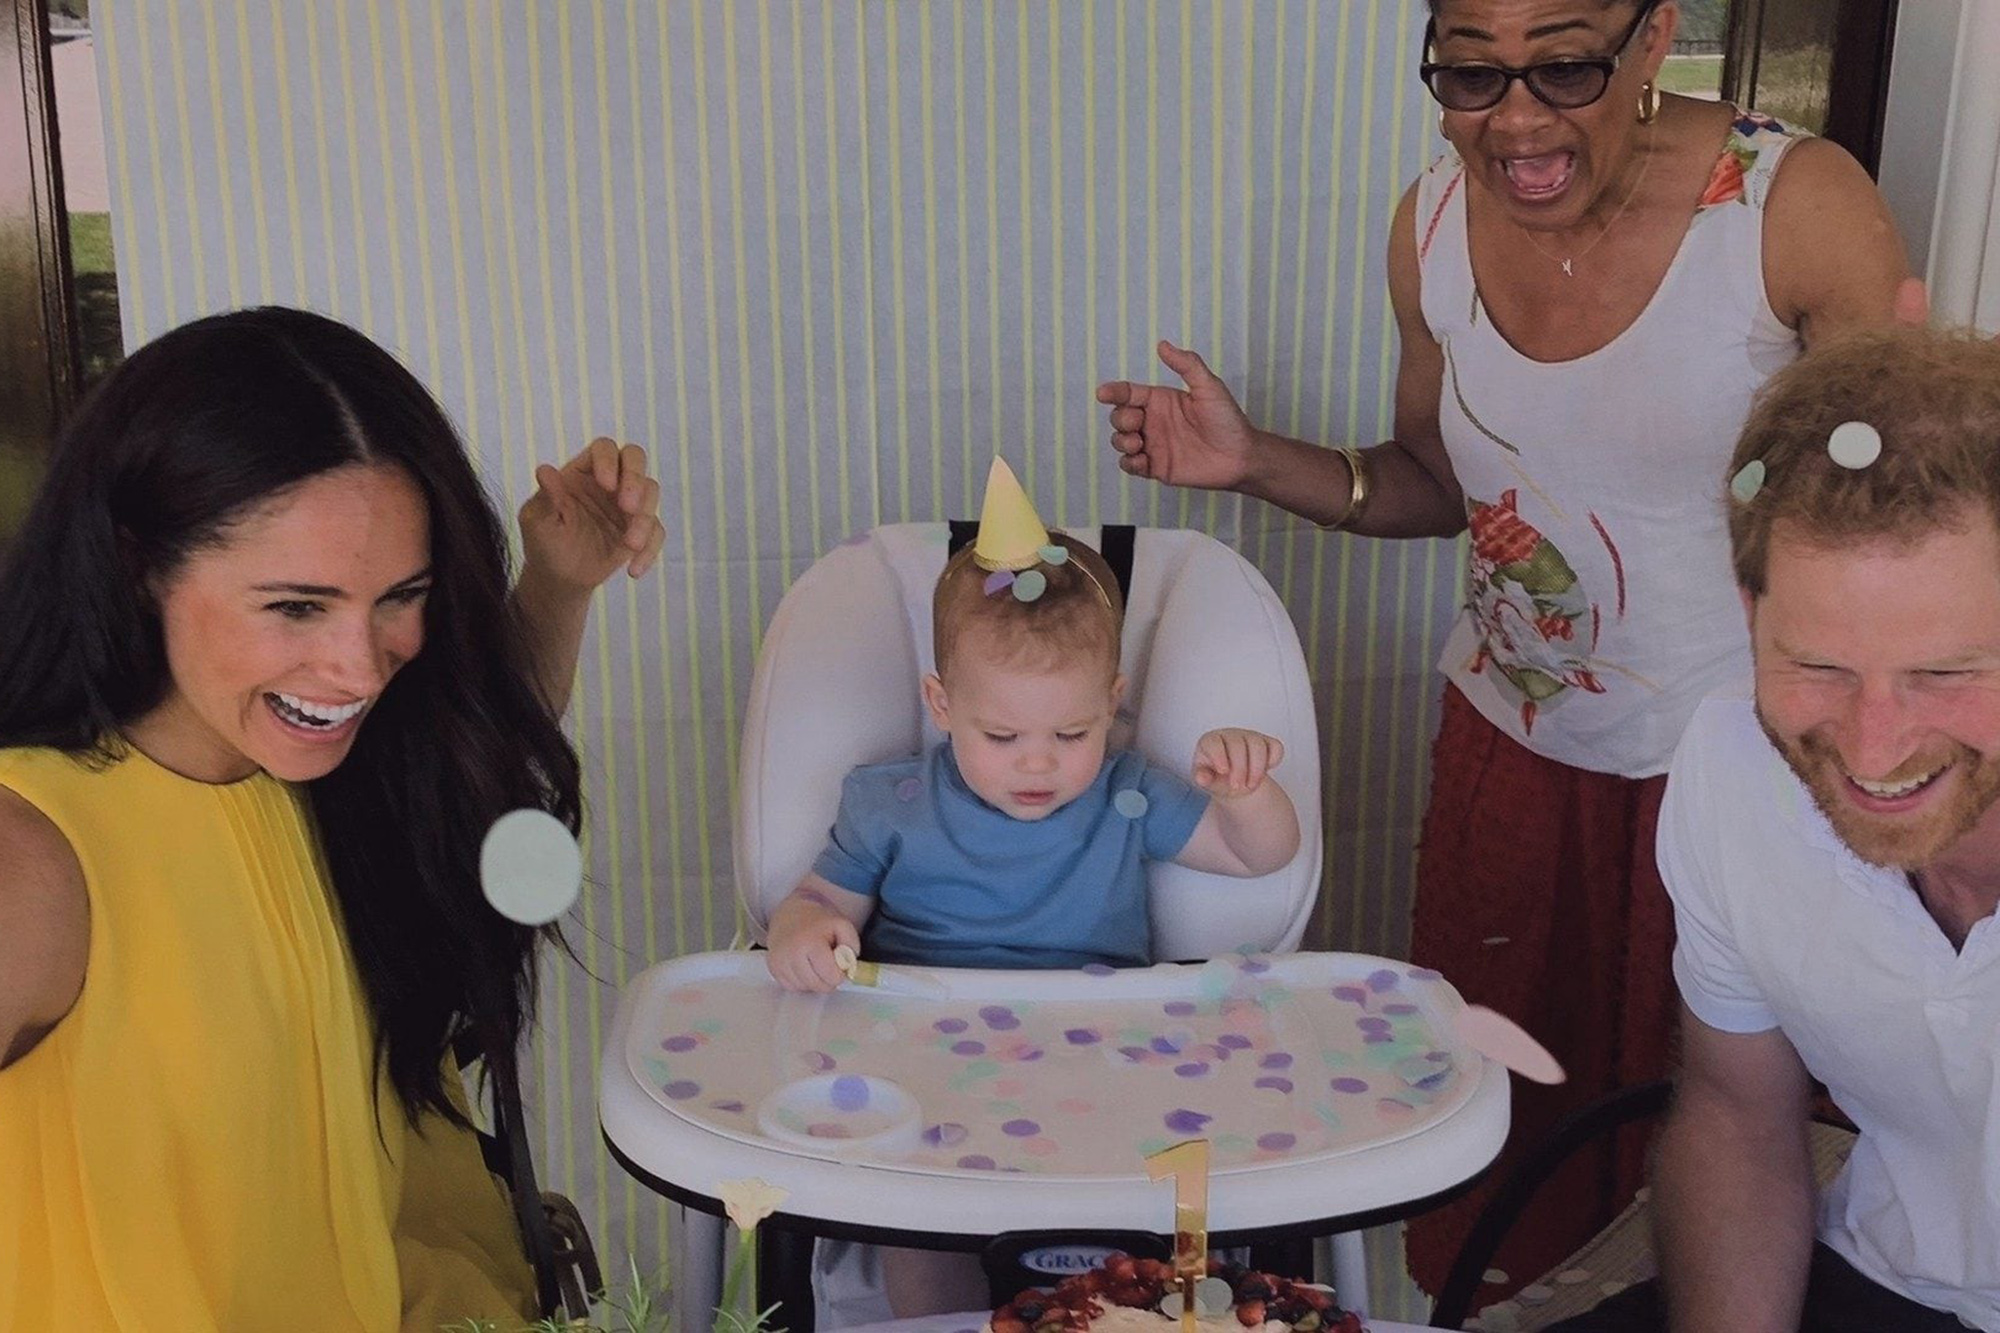 Meghan Markle with her Mom, Prince Harry and son Archie on his birthday